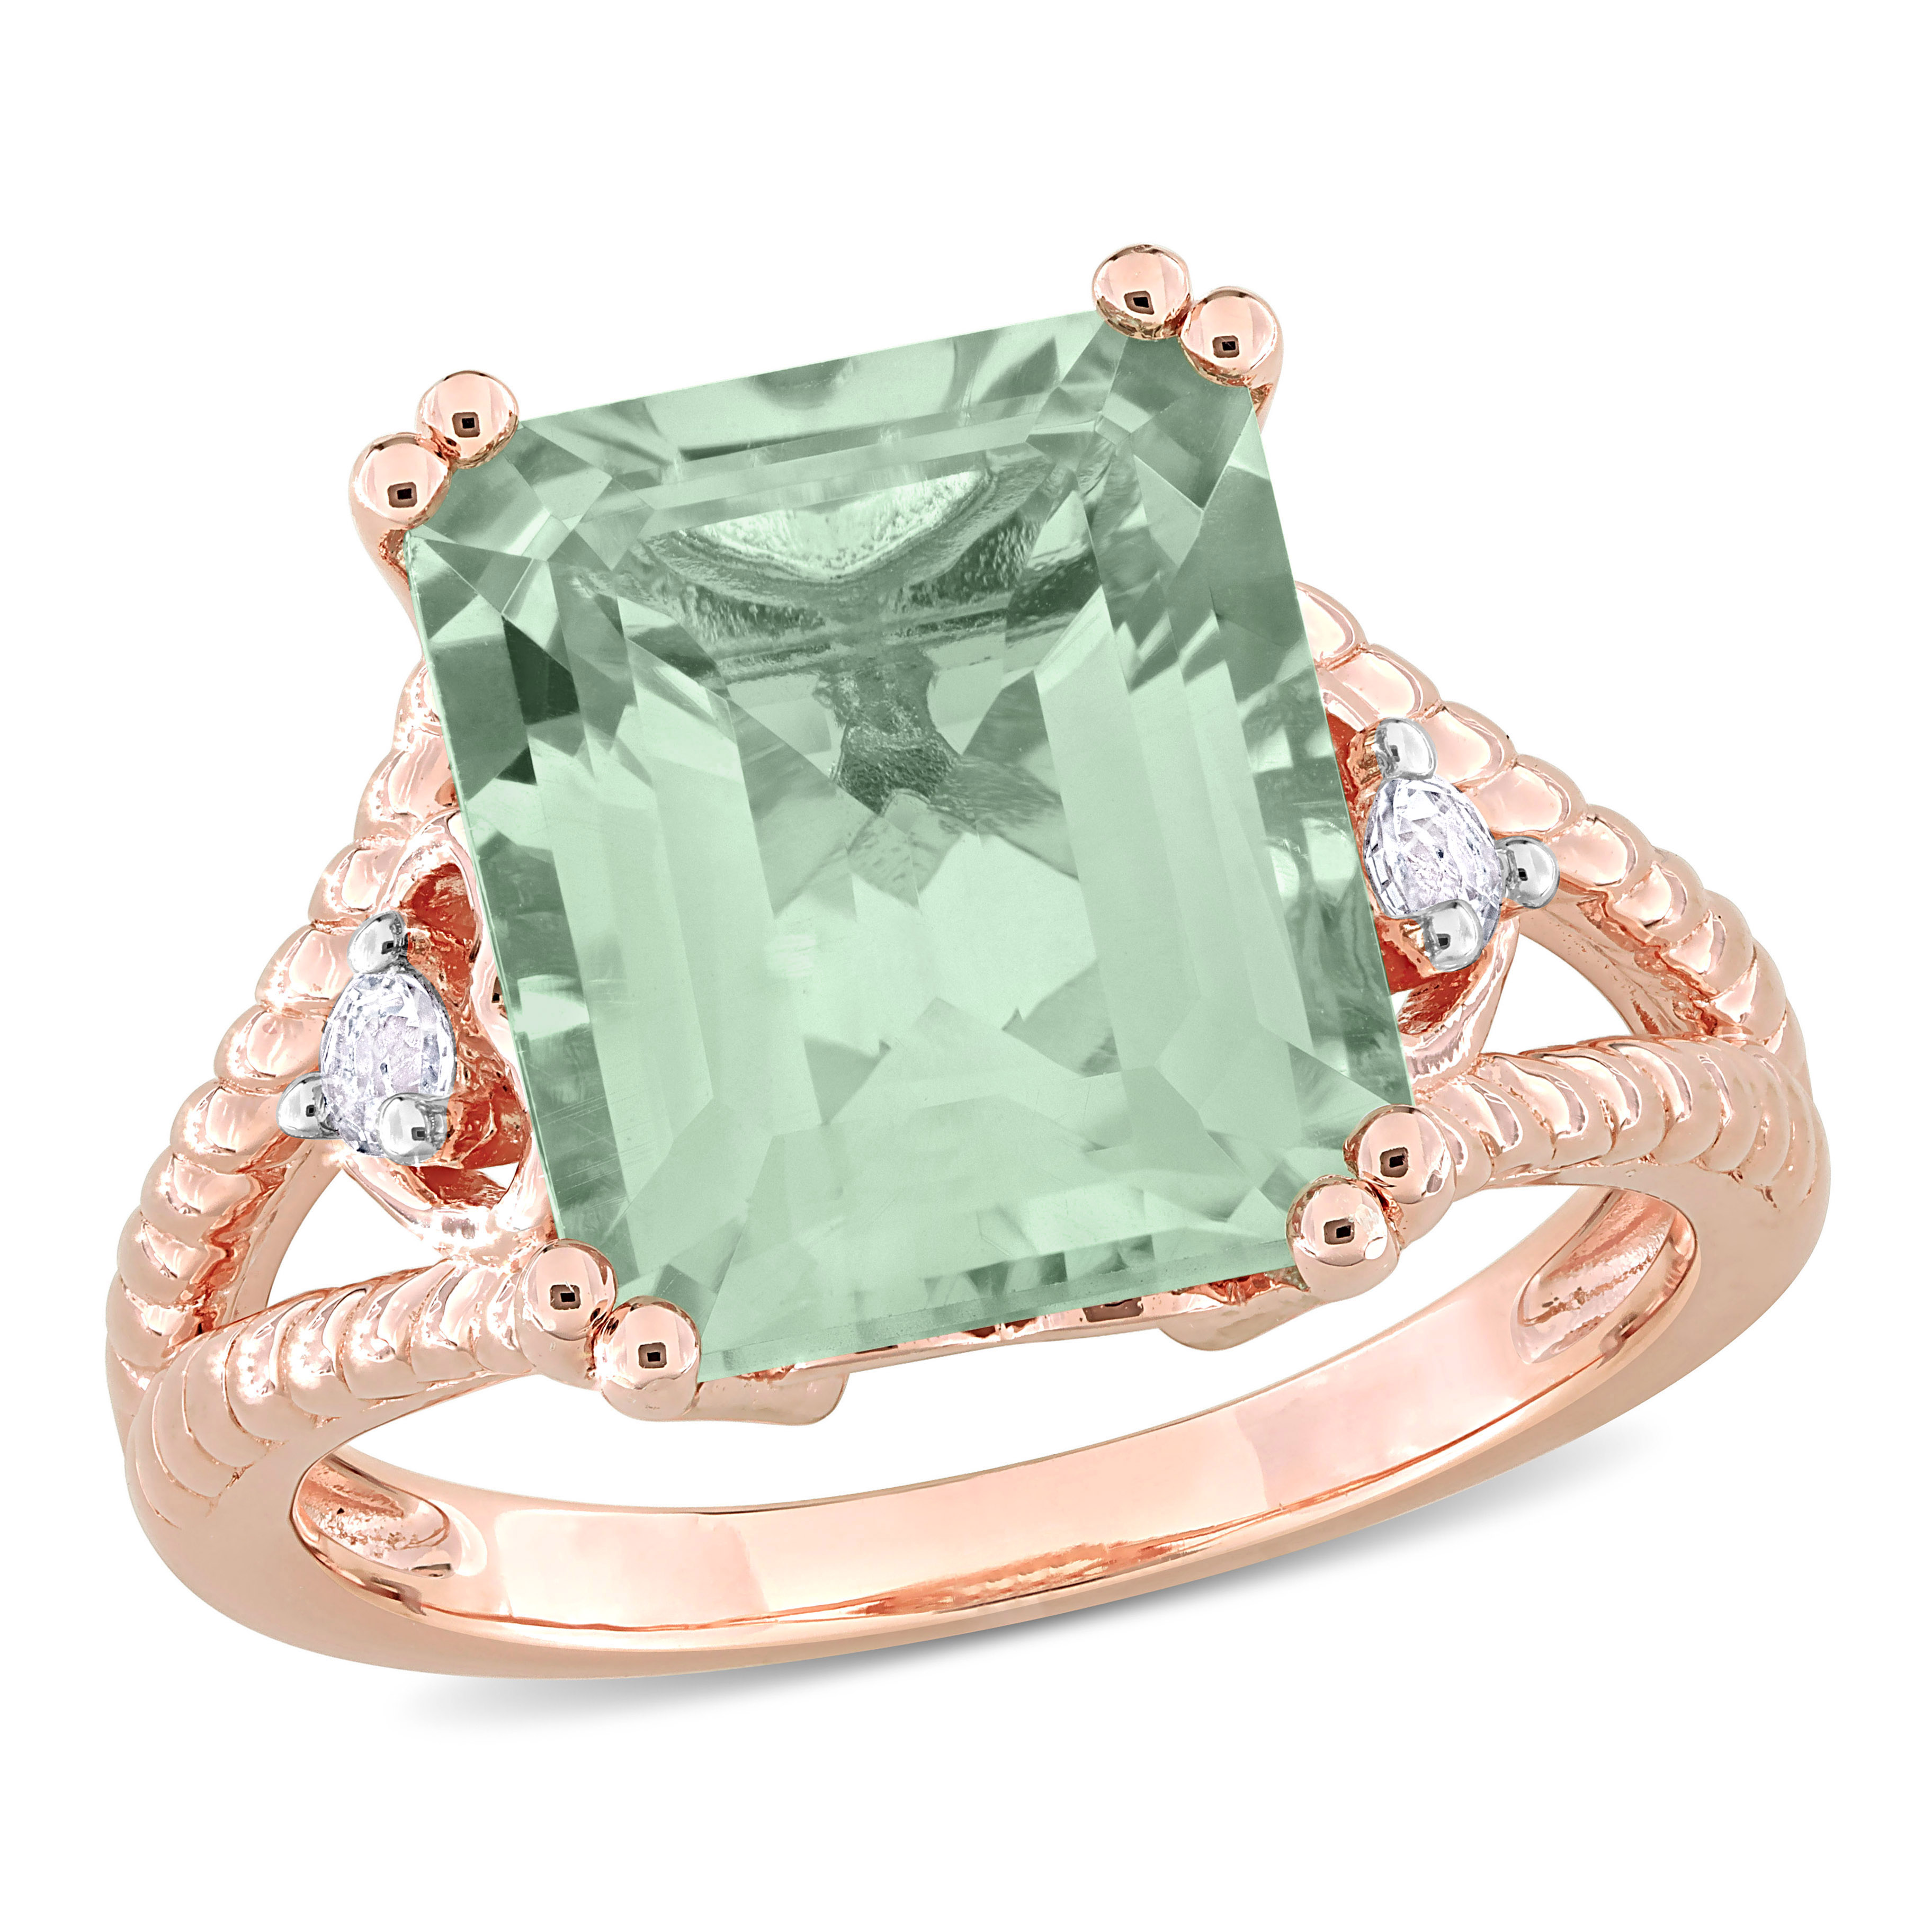 5 5/8 CT TGW Green Quartz and White Topaz Cocktail Ring in Rose Plated Sterling Silver